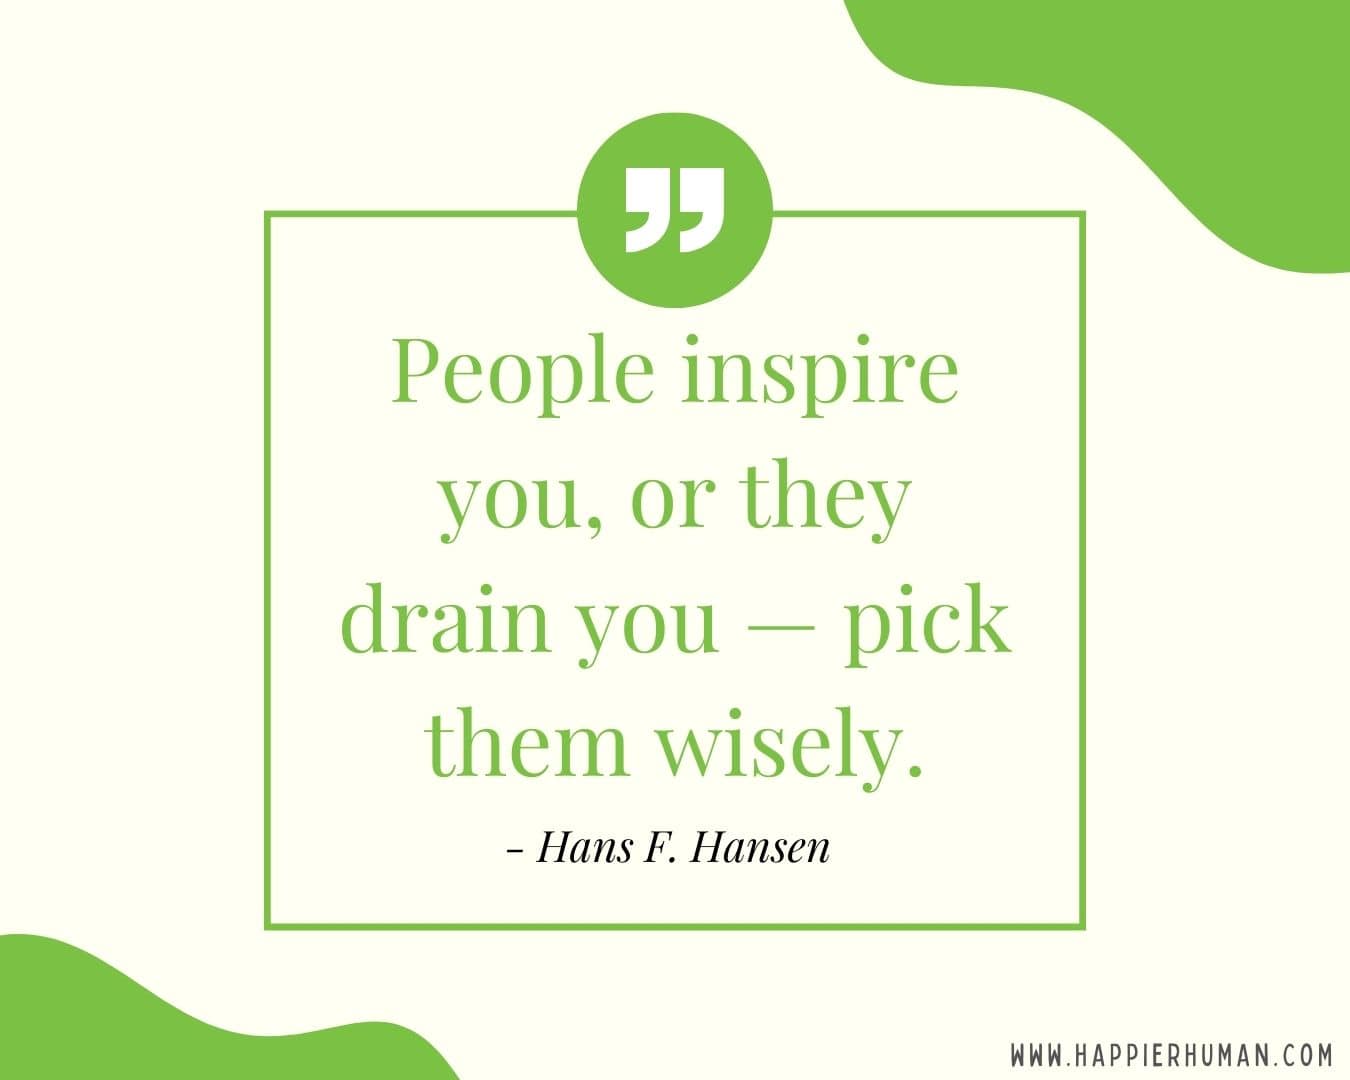 Introvert Quotes - “People inspire you, or they drain you — pick them wisely.” – Hans F. Hansen